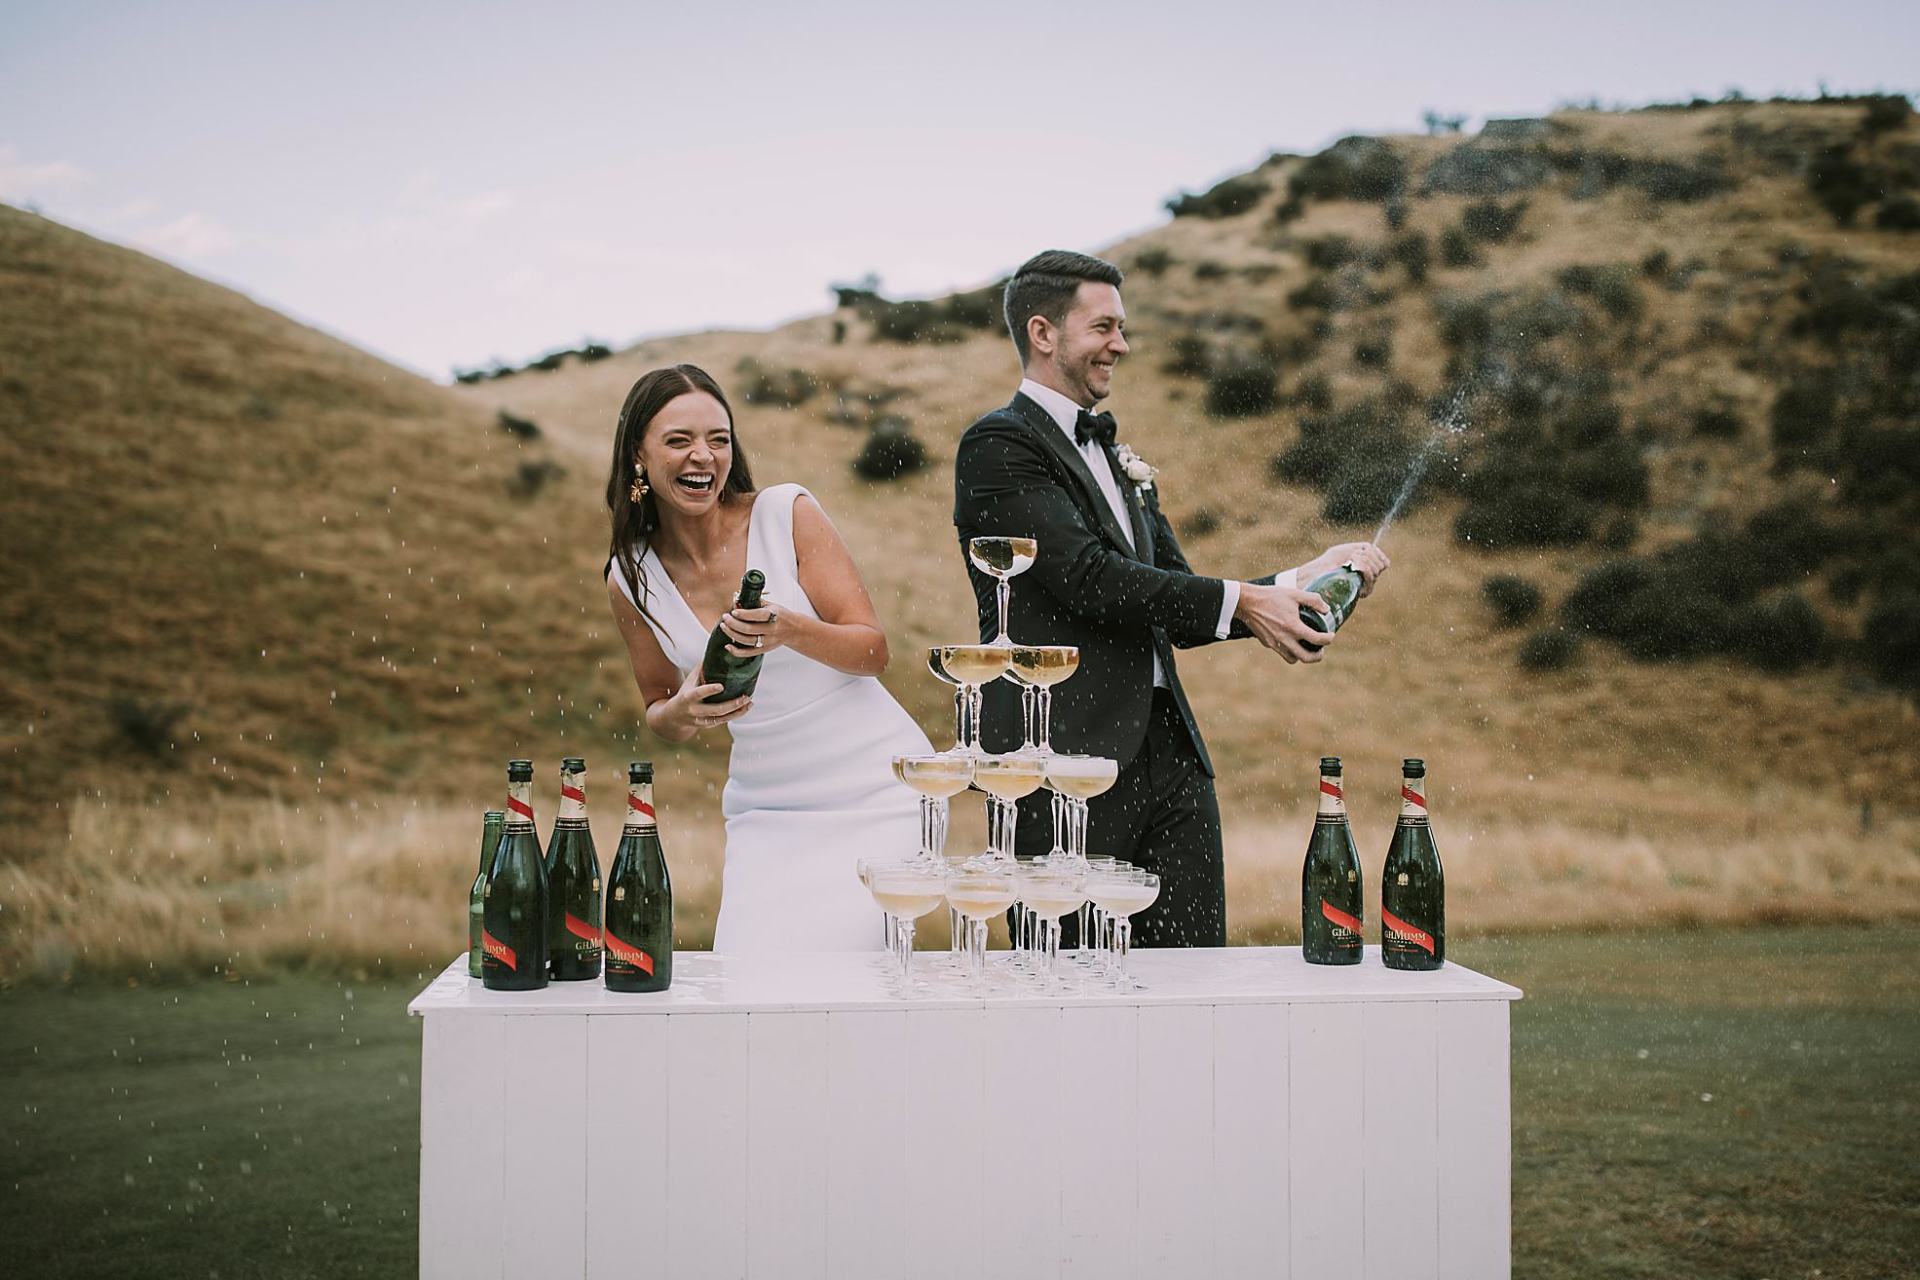 Charlotte Kiri Photography - Wedding Photography of a bride wearing an elegant fitted V-neck gown, and her groom in a black tuxedo with black bow tie, as they pop champagne corks, in front of a champagne glass pyramid in Wanaka, New Zealand.